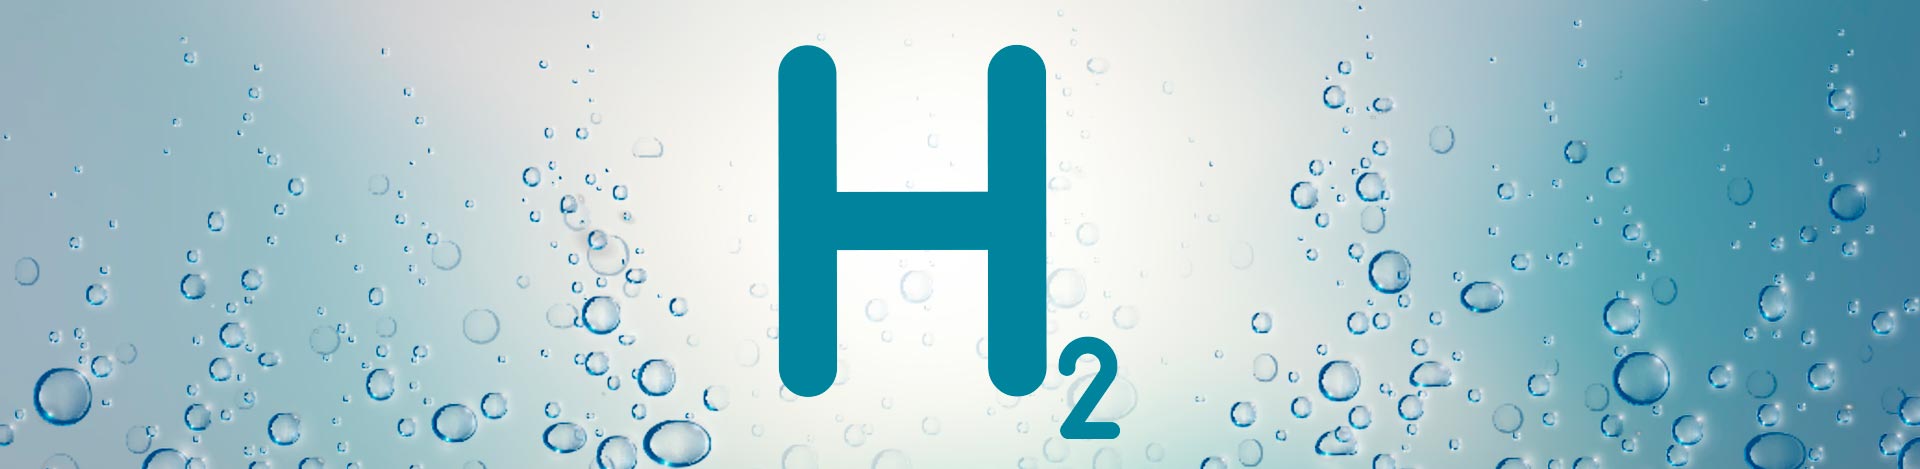 The making of Hydrogen – Definition and acceleration of a sector